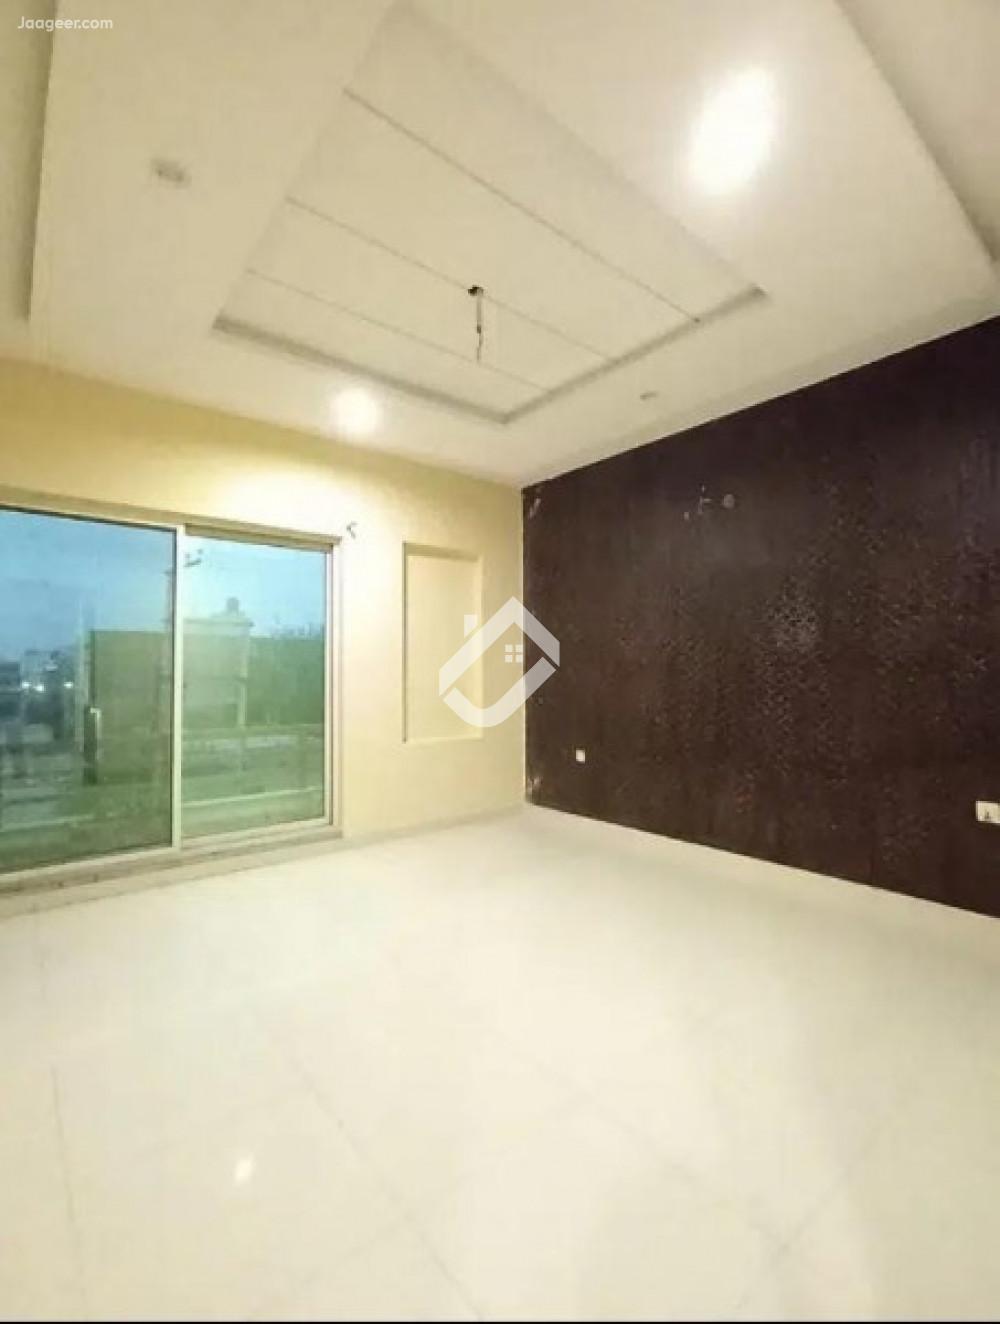 5 Marla House For Sale In Madina Town Babar Chowk Faisalabad in Madina Town, Faisalabad